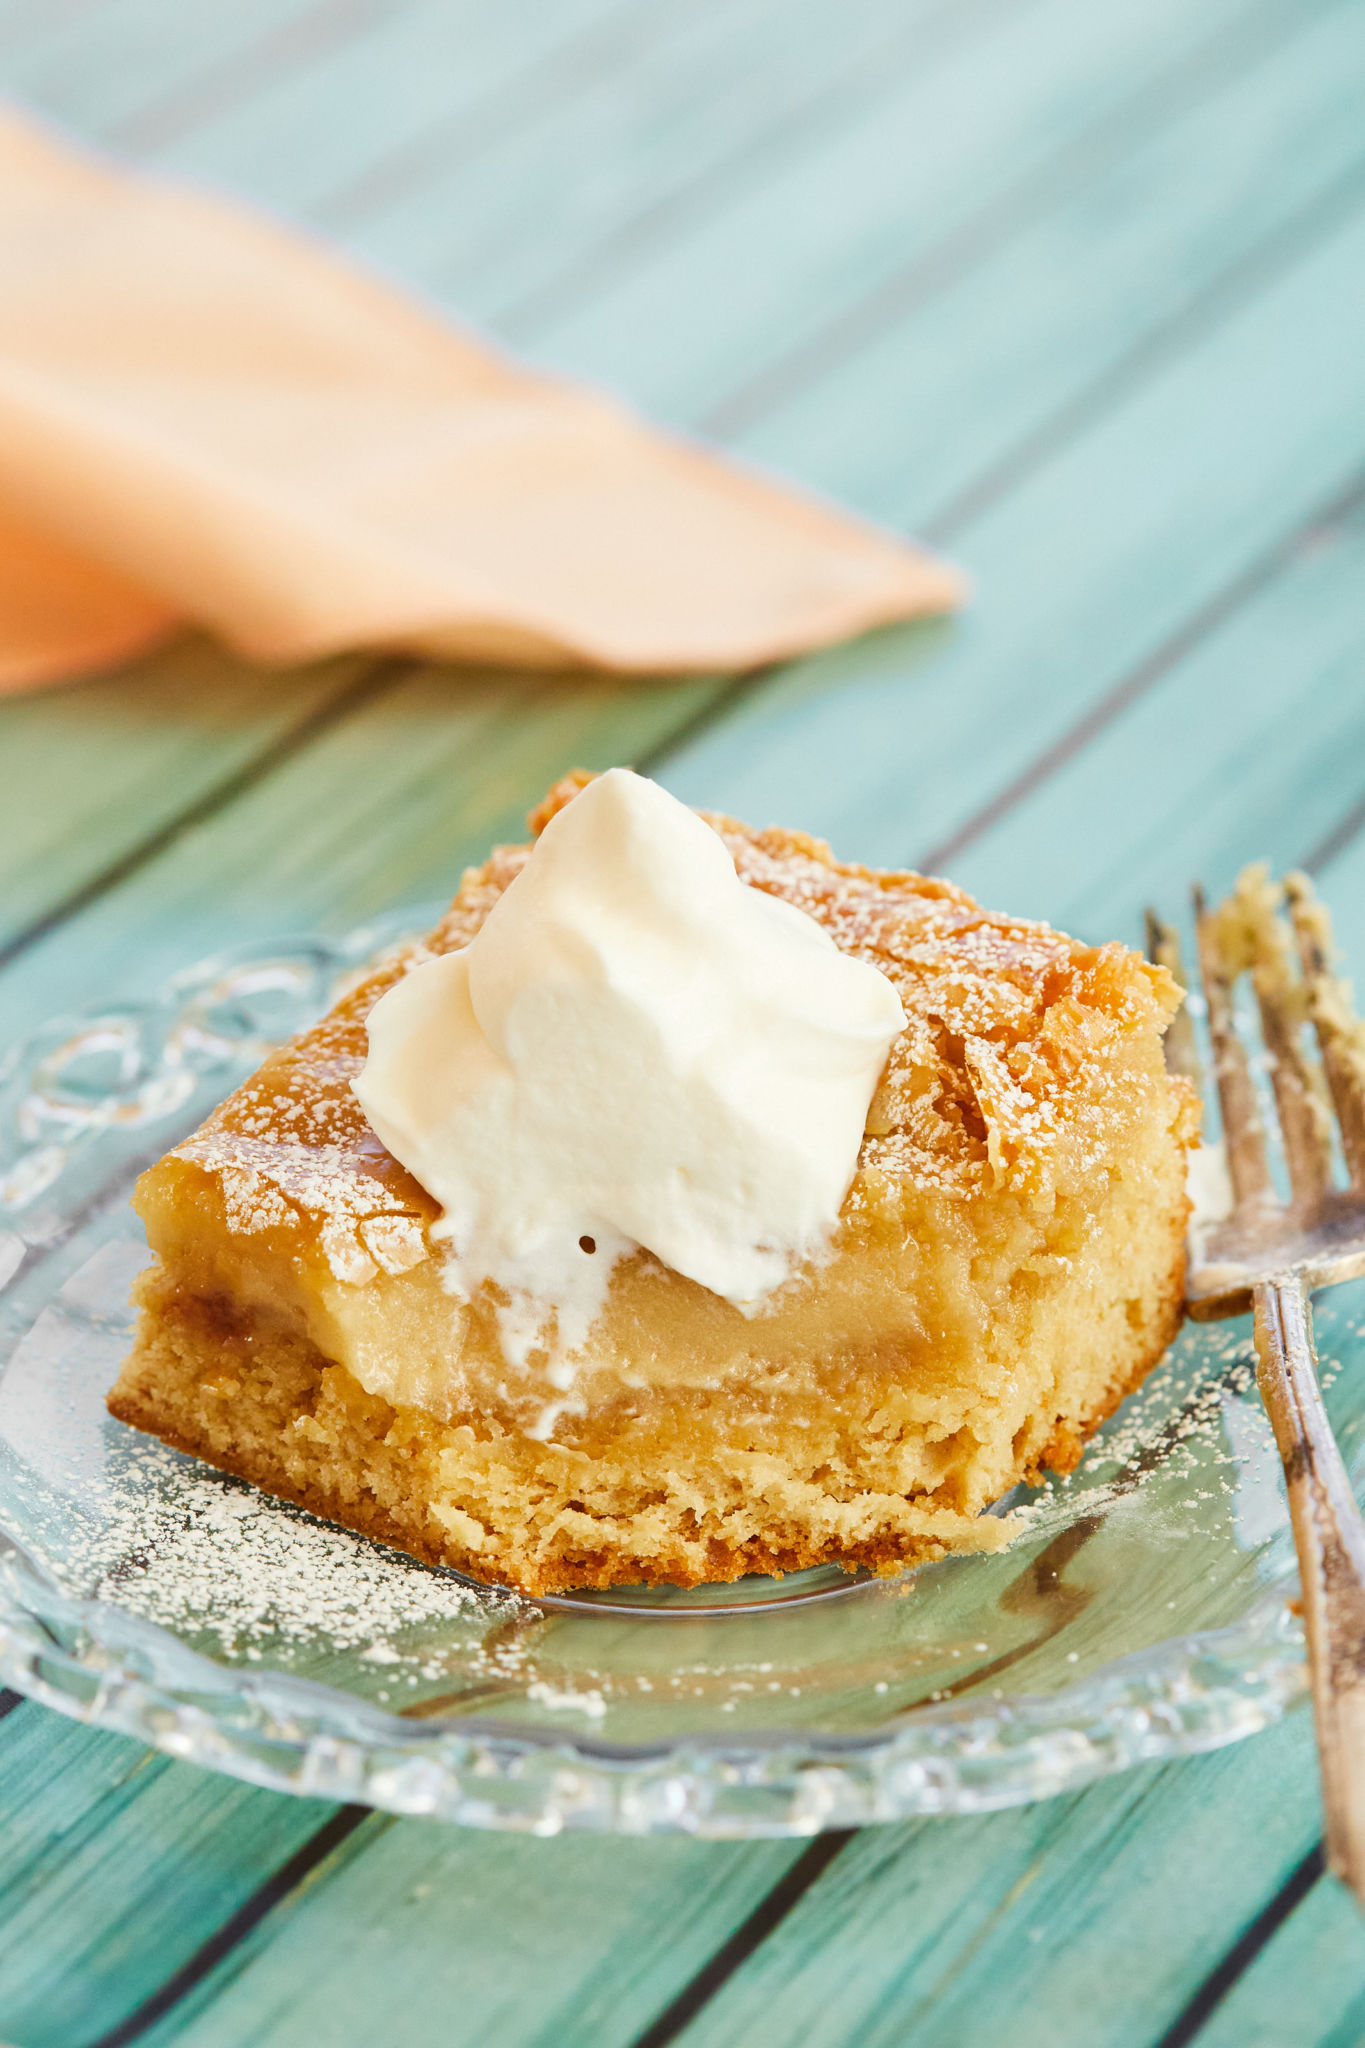 A slice of butter cake, topped with whipped cream.